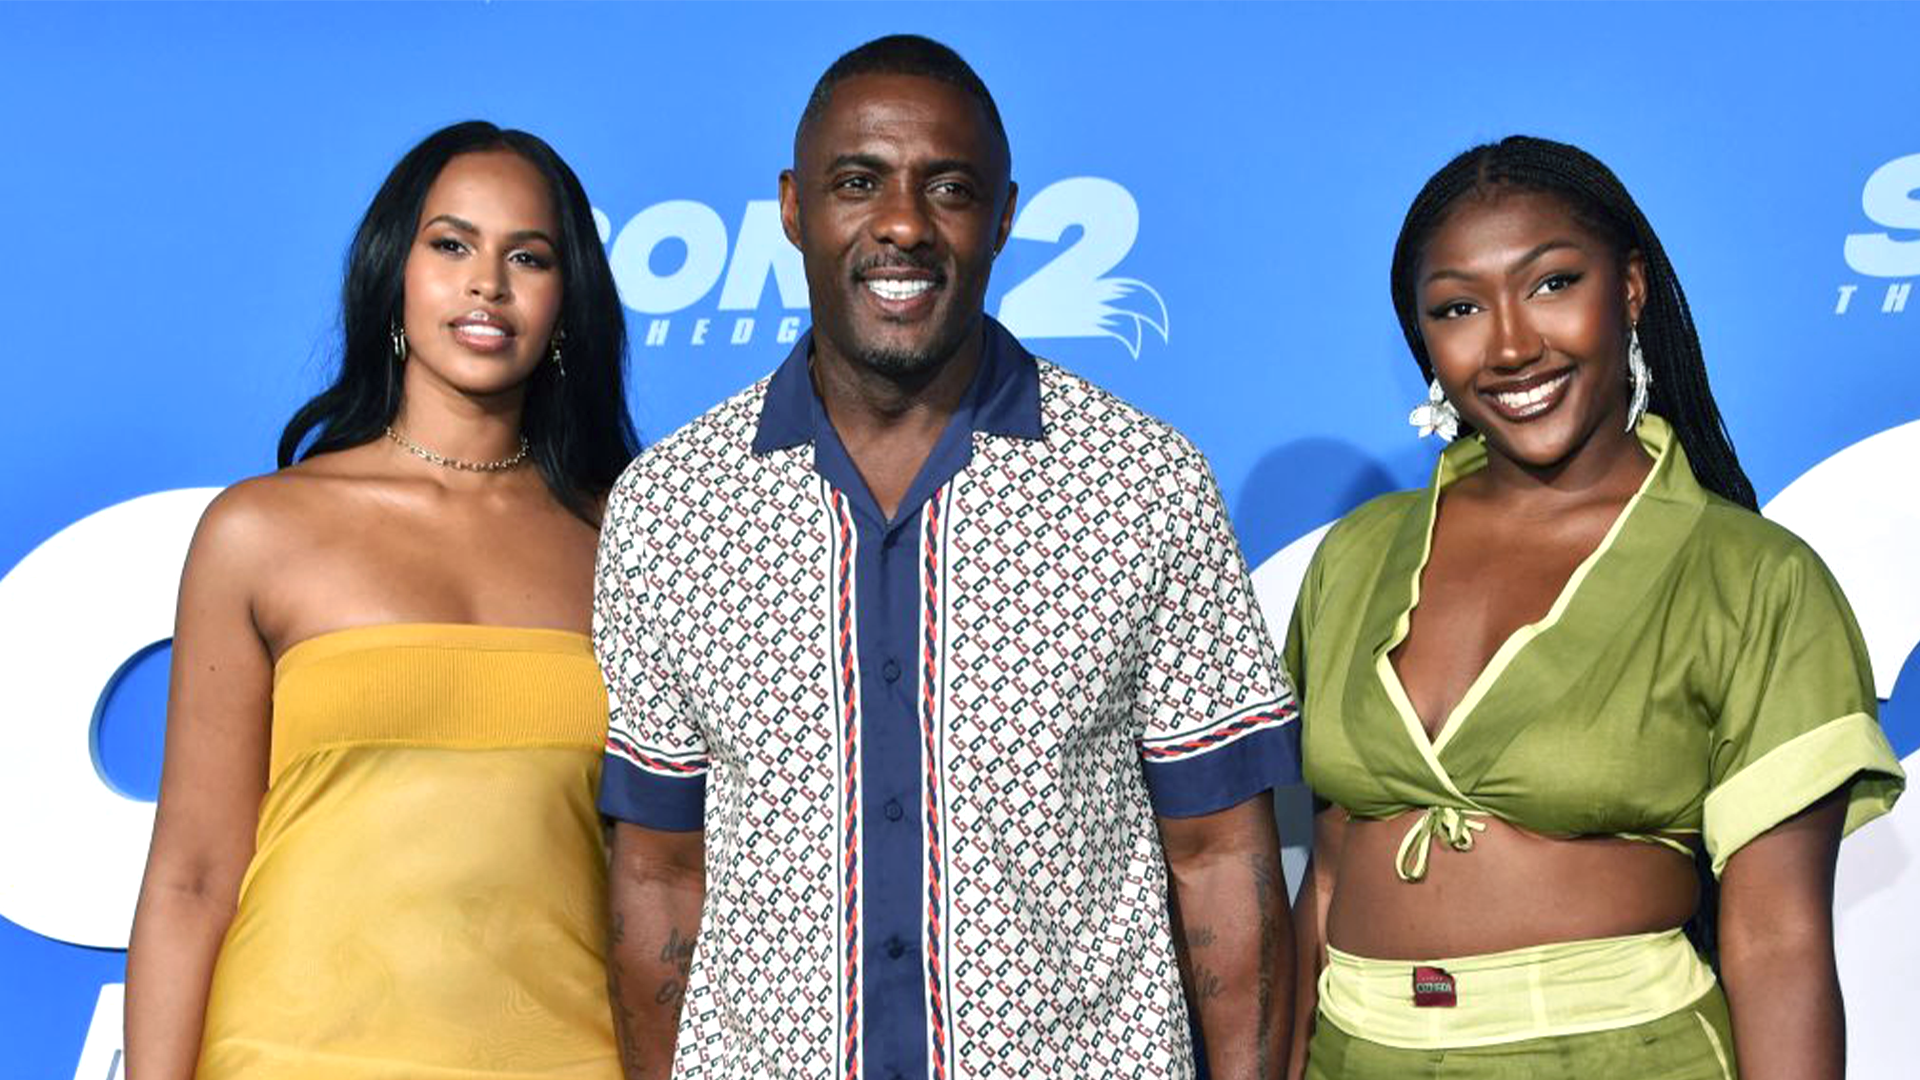 Idris Elba Built A $30M Fortune Playing Roles, But His Most Important Has Been As A Father Of Two — 'It's An Important Part Of My Life'